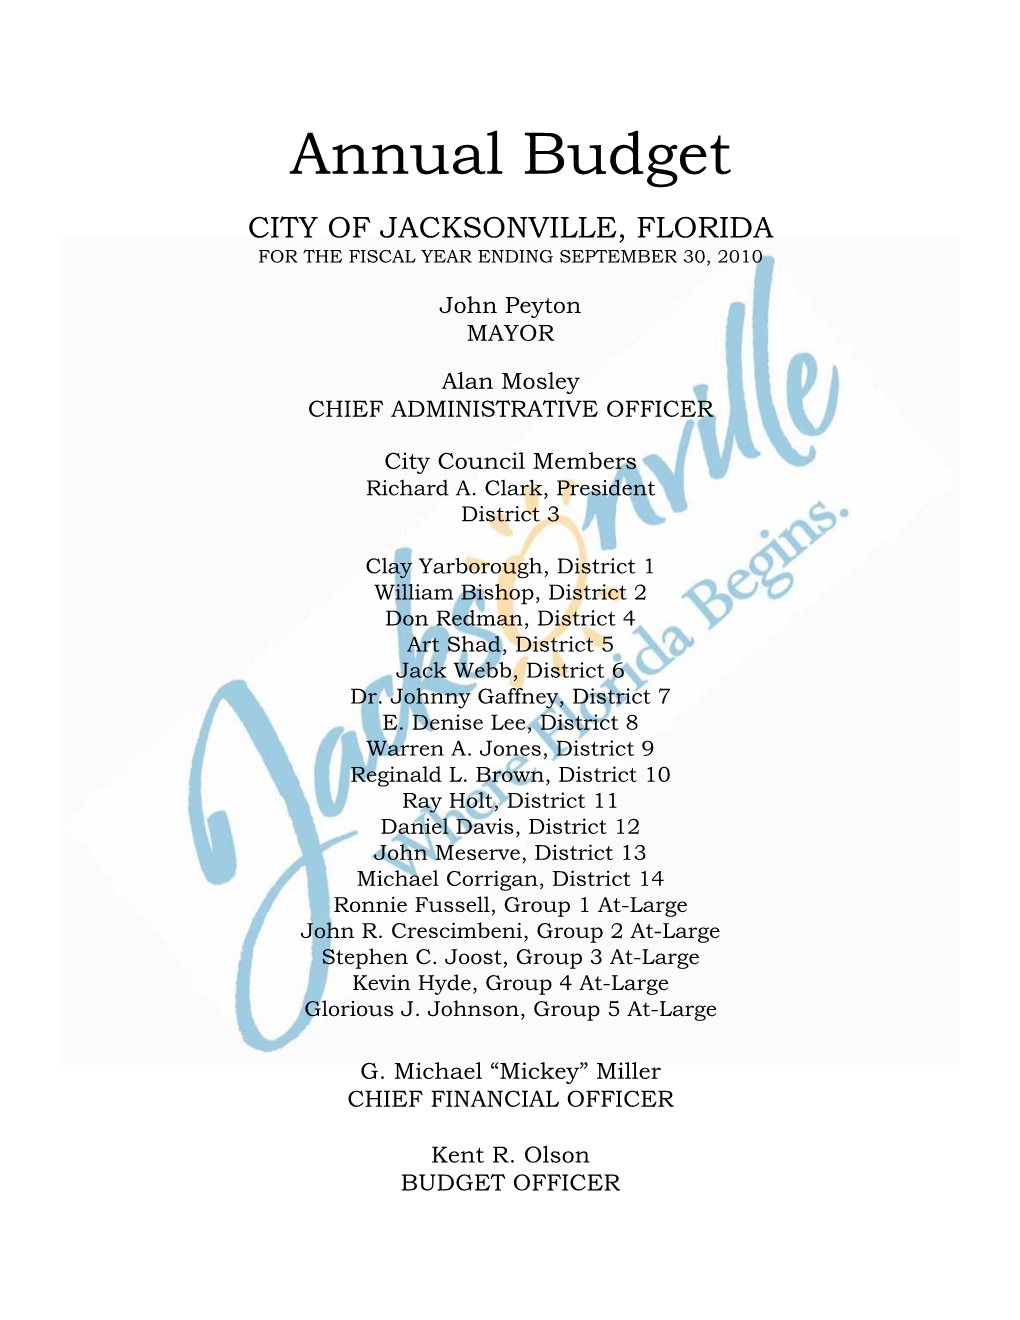 Annual Budget CITY of JACKSONVILLE, FLORIDA for the FISCAL YEAR ENDING SEPTEMBER 30, 2010